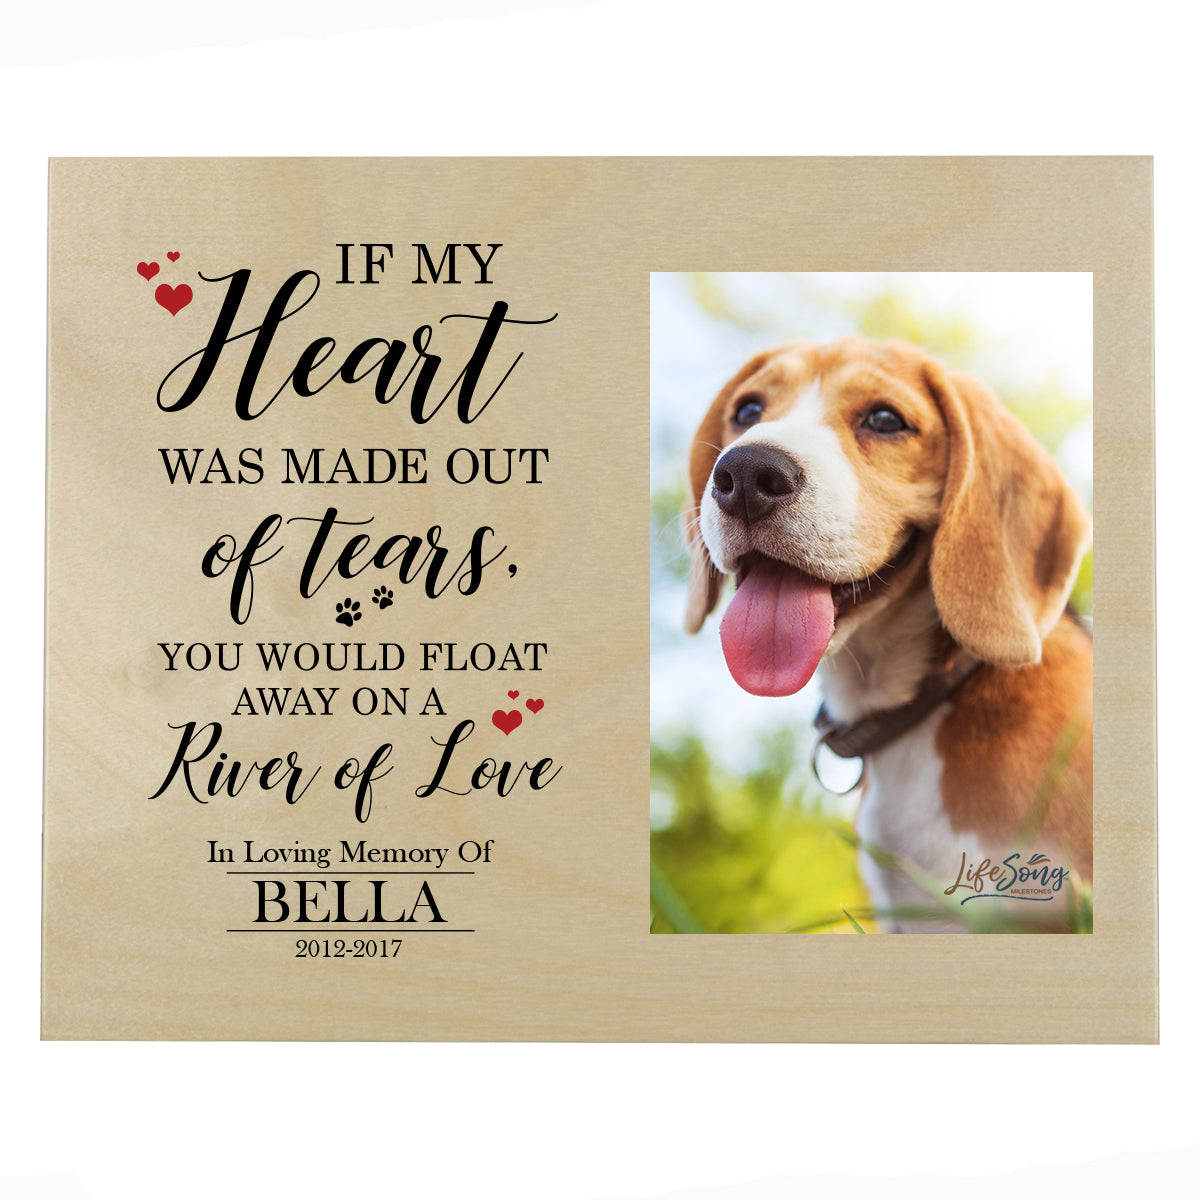 Pet Memorial Photo Wall Plaque Décor - If My Heart Was Made Out of Tears